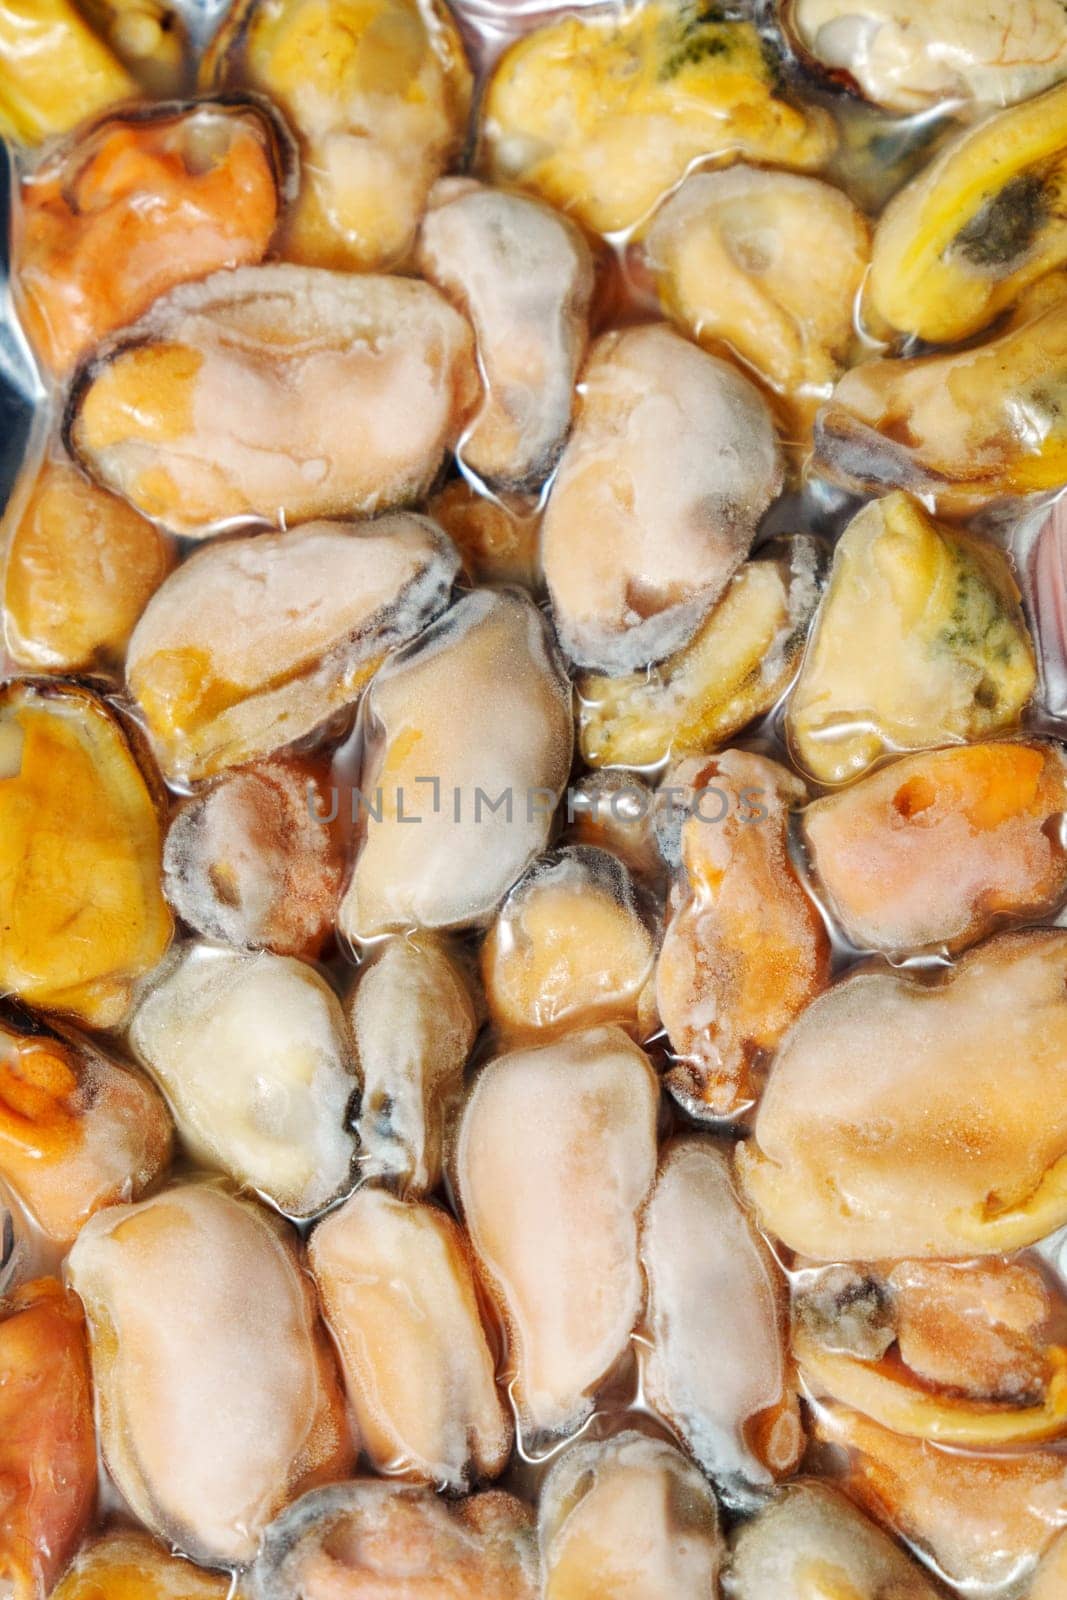 Frozen mussels background. Frozen seafood. Wholesale of fish. Peeled mussels. Vertical photo